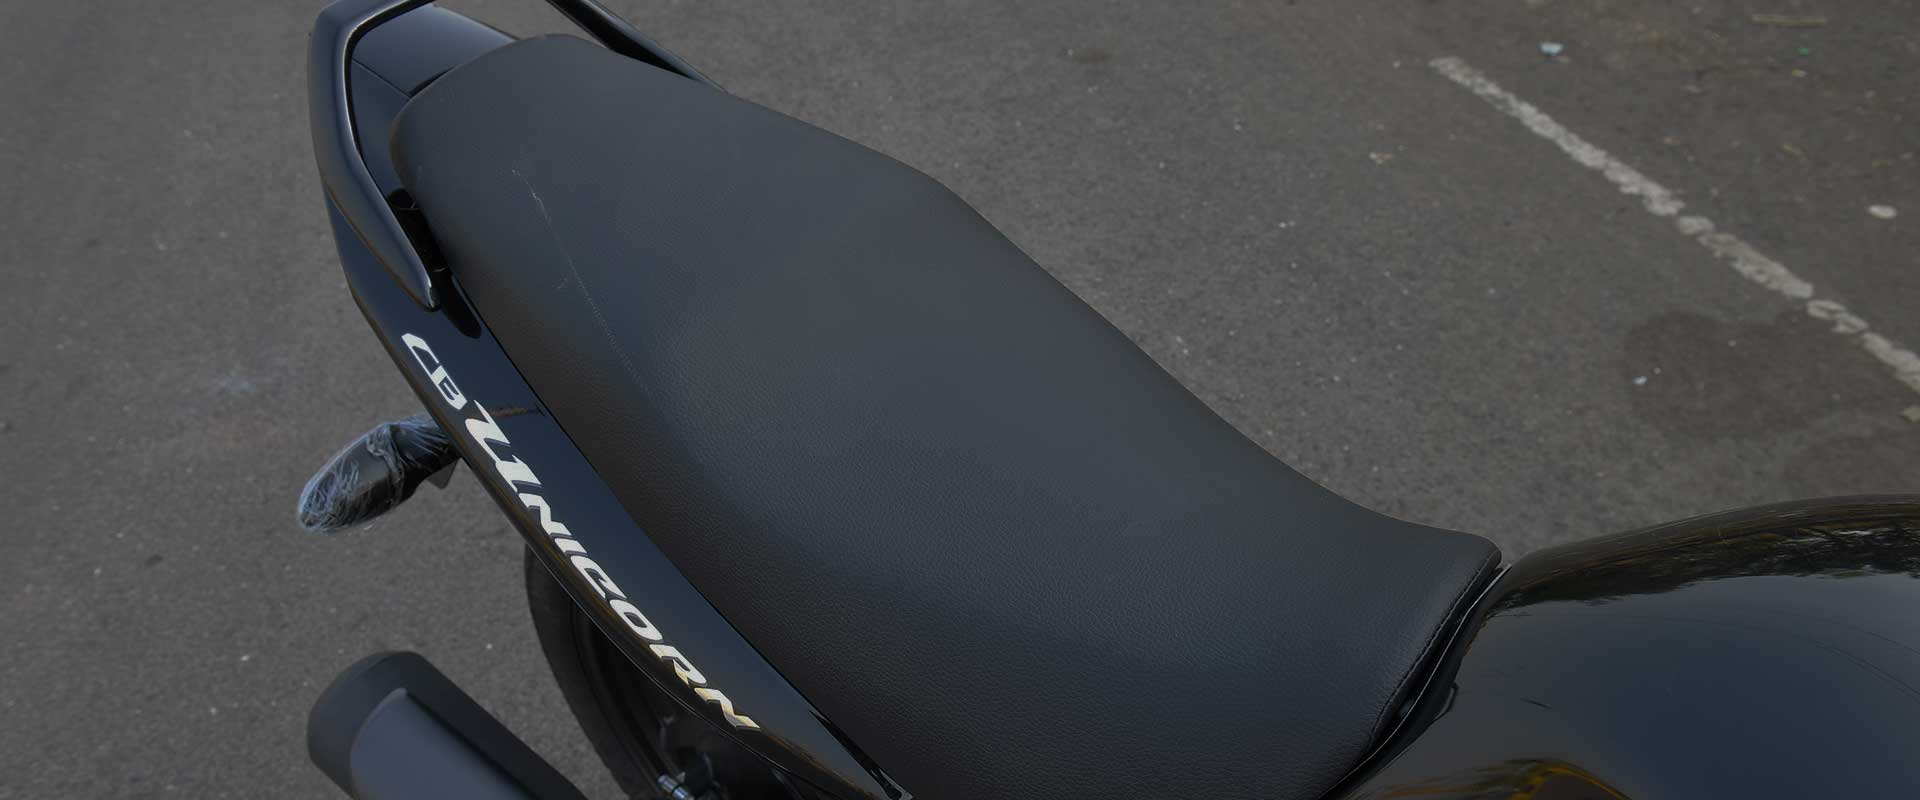 Supplier of seat covers and petrol tank bags for Honda Bikes & Scooters